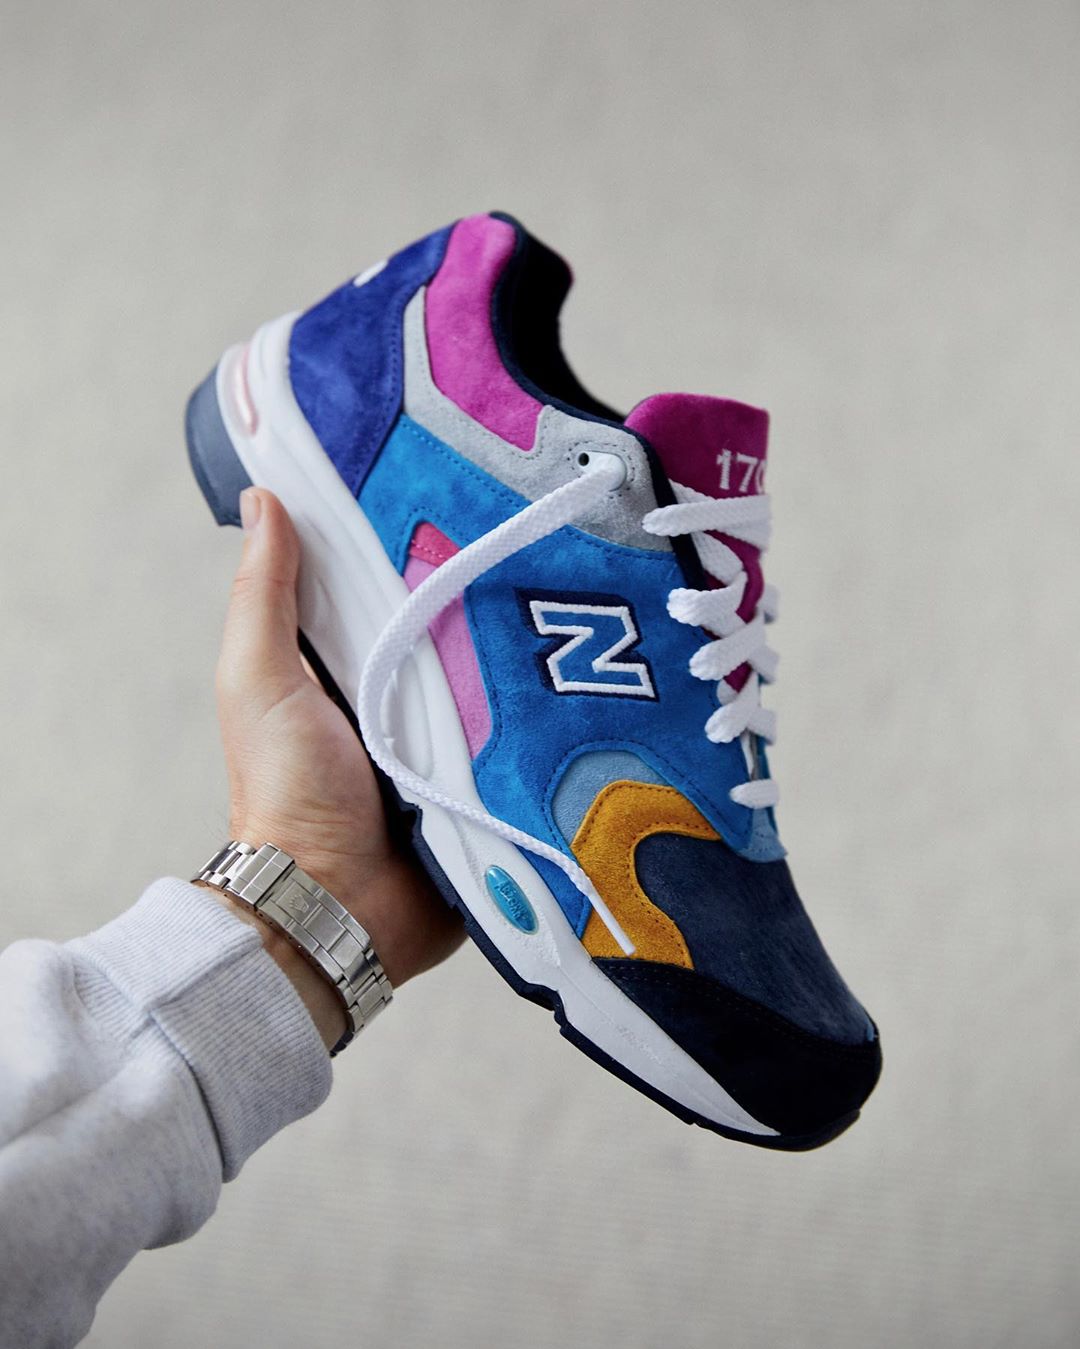 KITH x New Balance “The Colorist” Collection